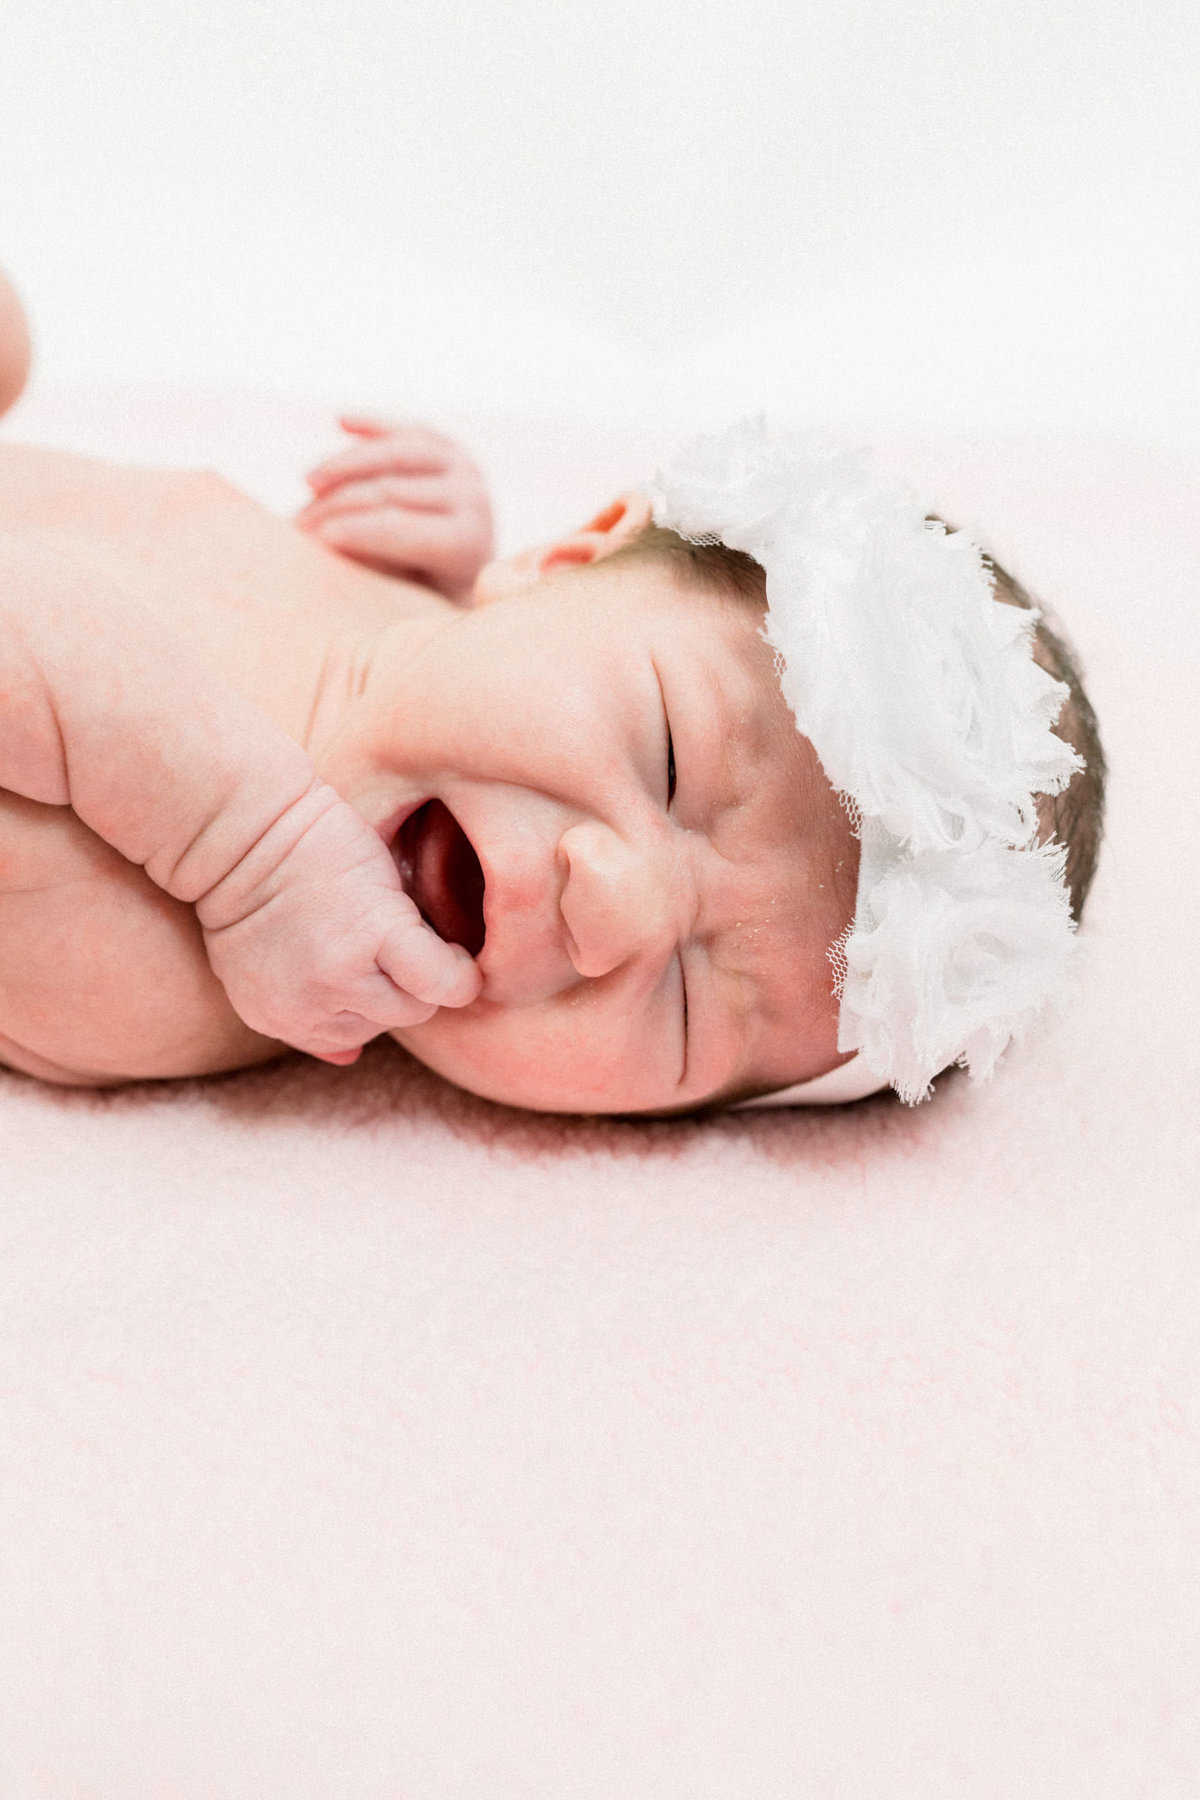 Baby begins to cry during newborn photography session